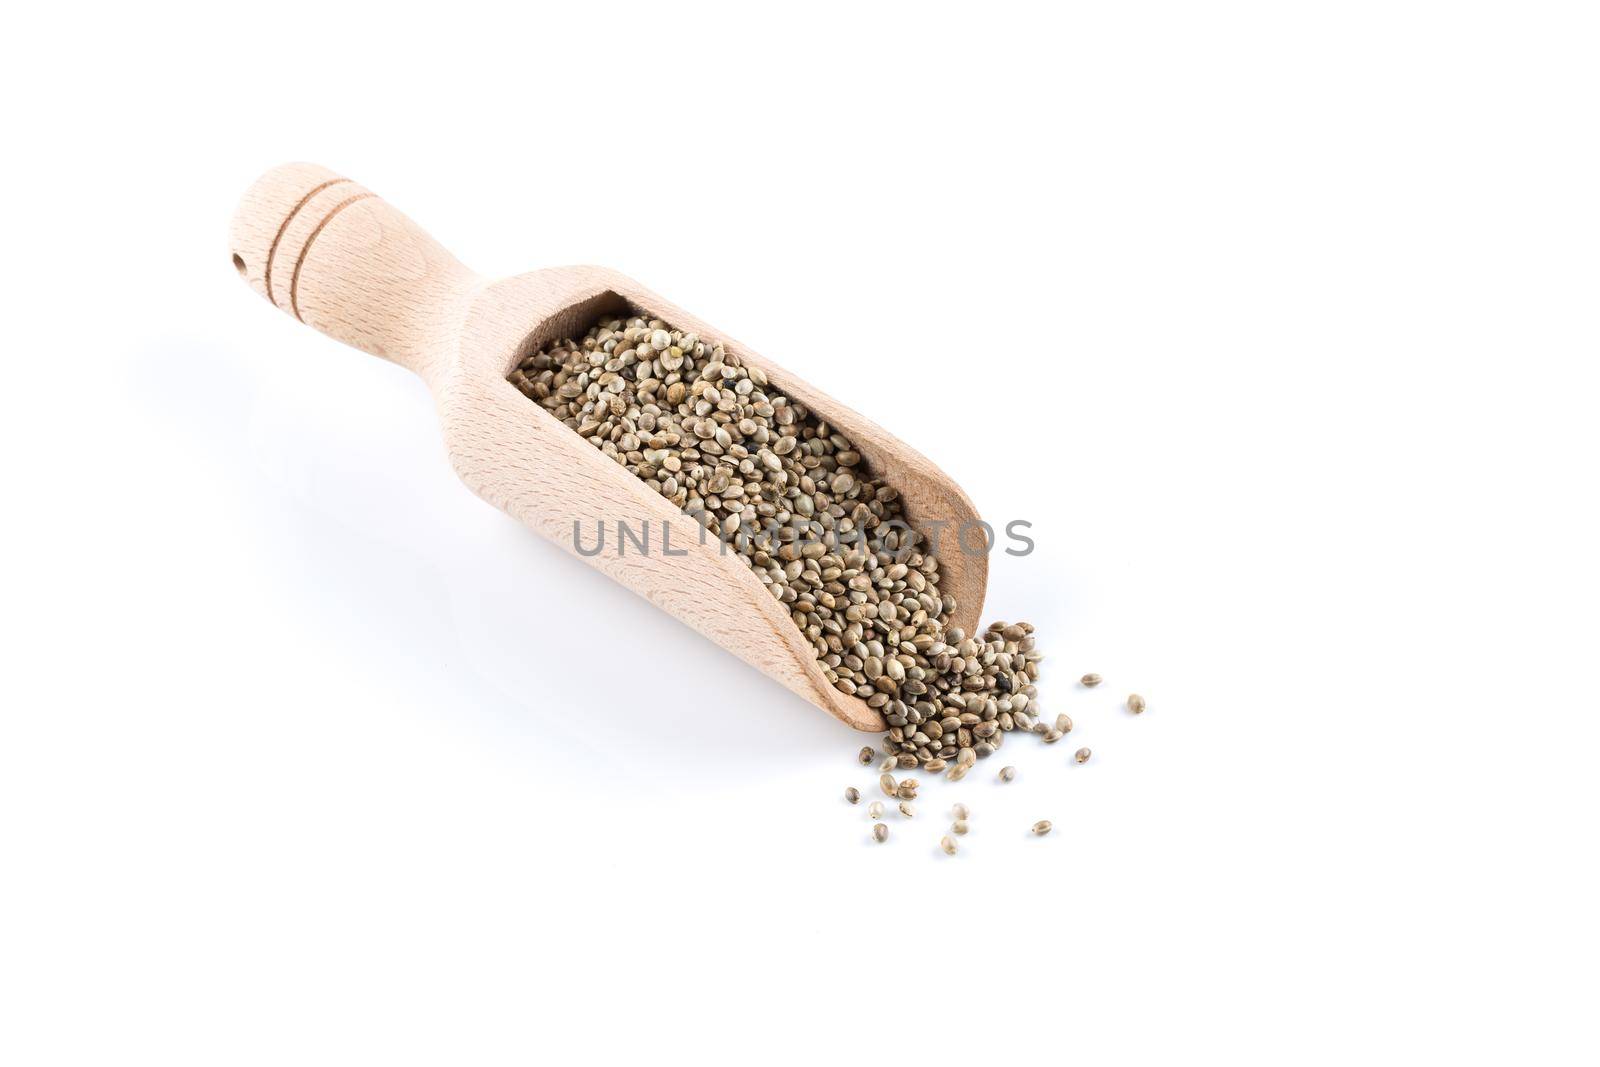 Cannabis Hemp seeds in wooden scoop close up macro shot isolated on white background